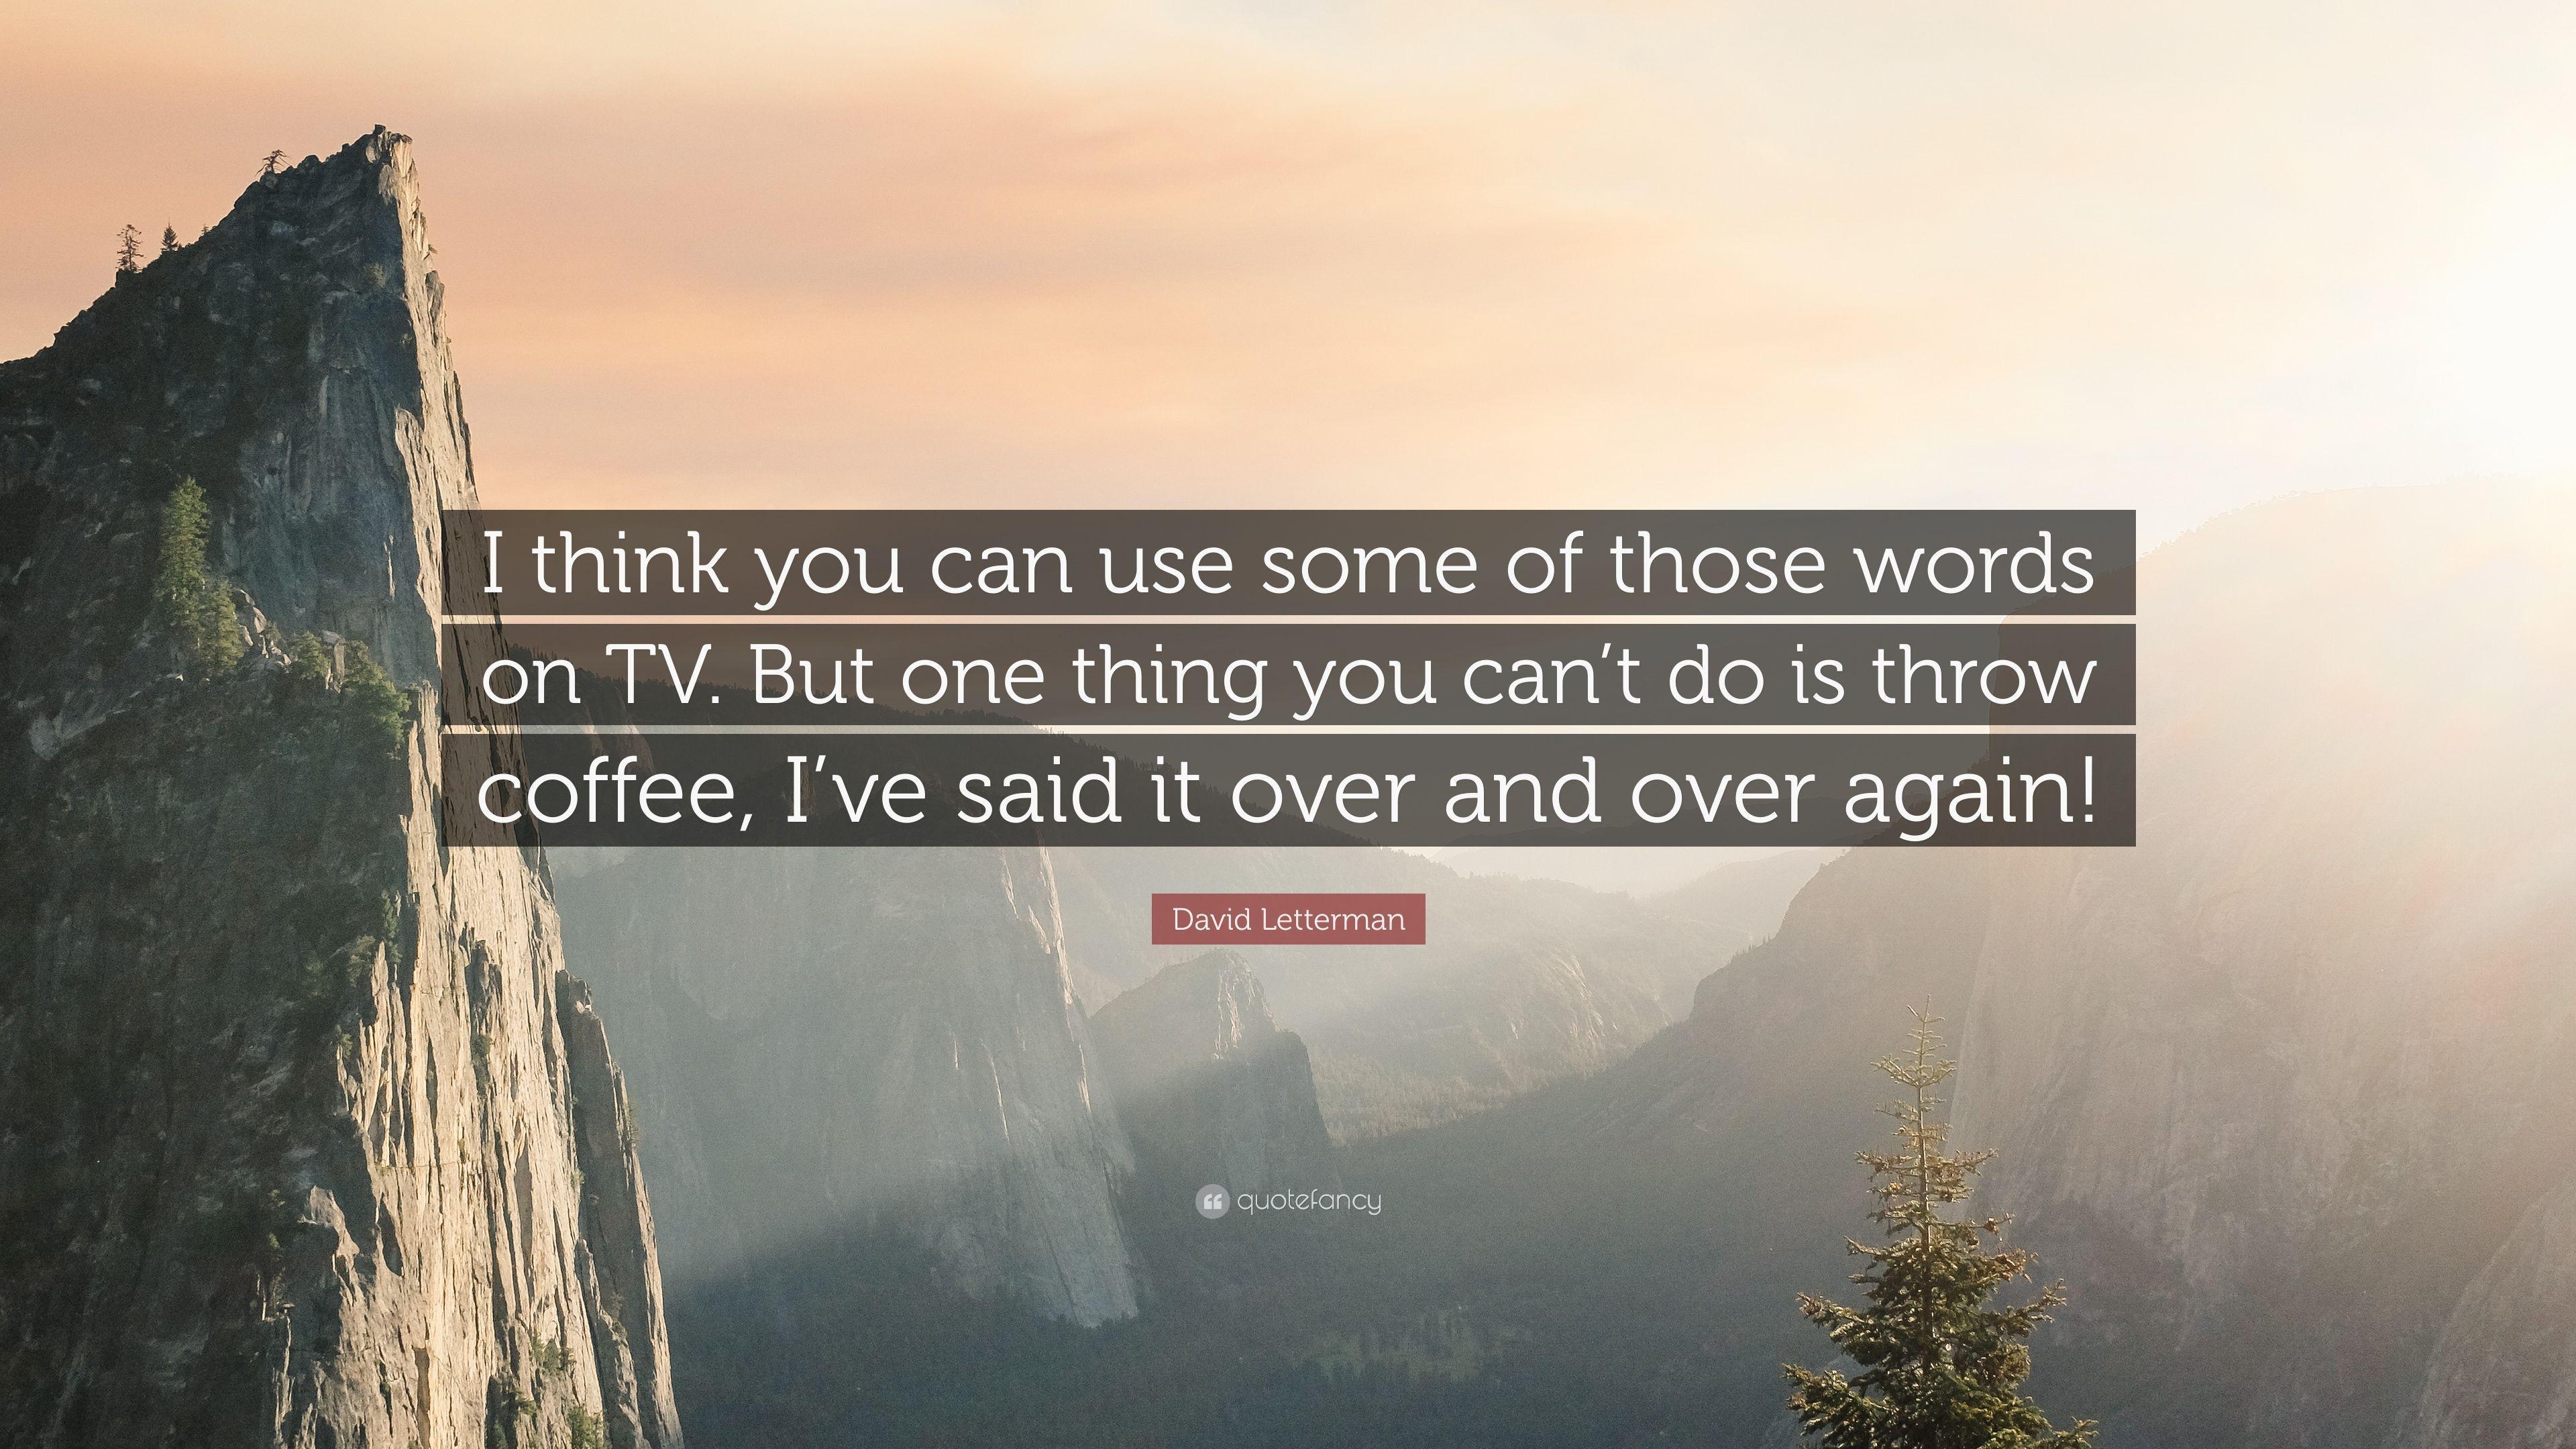 David Letterman Quote: “I think you can use some of those words